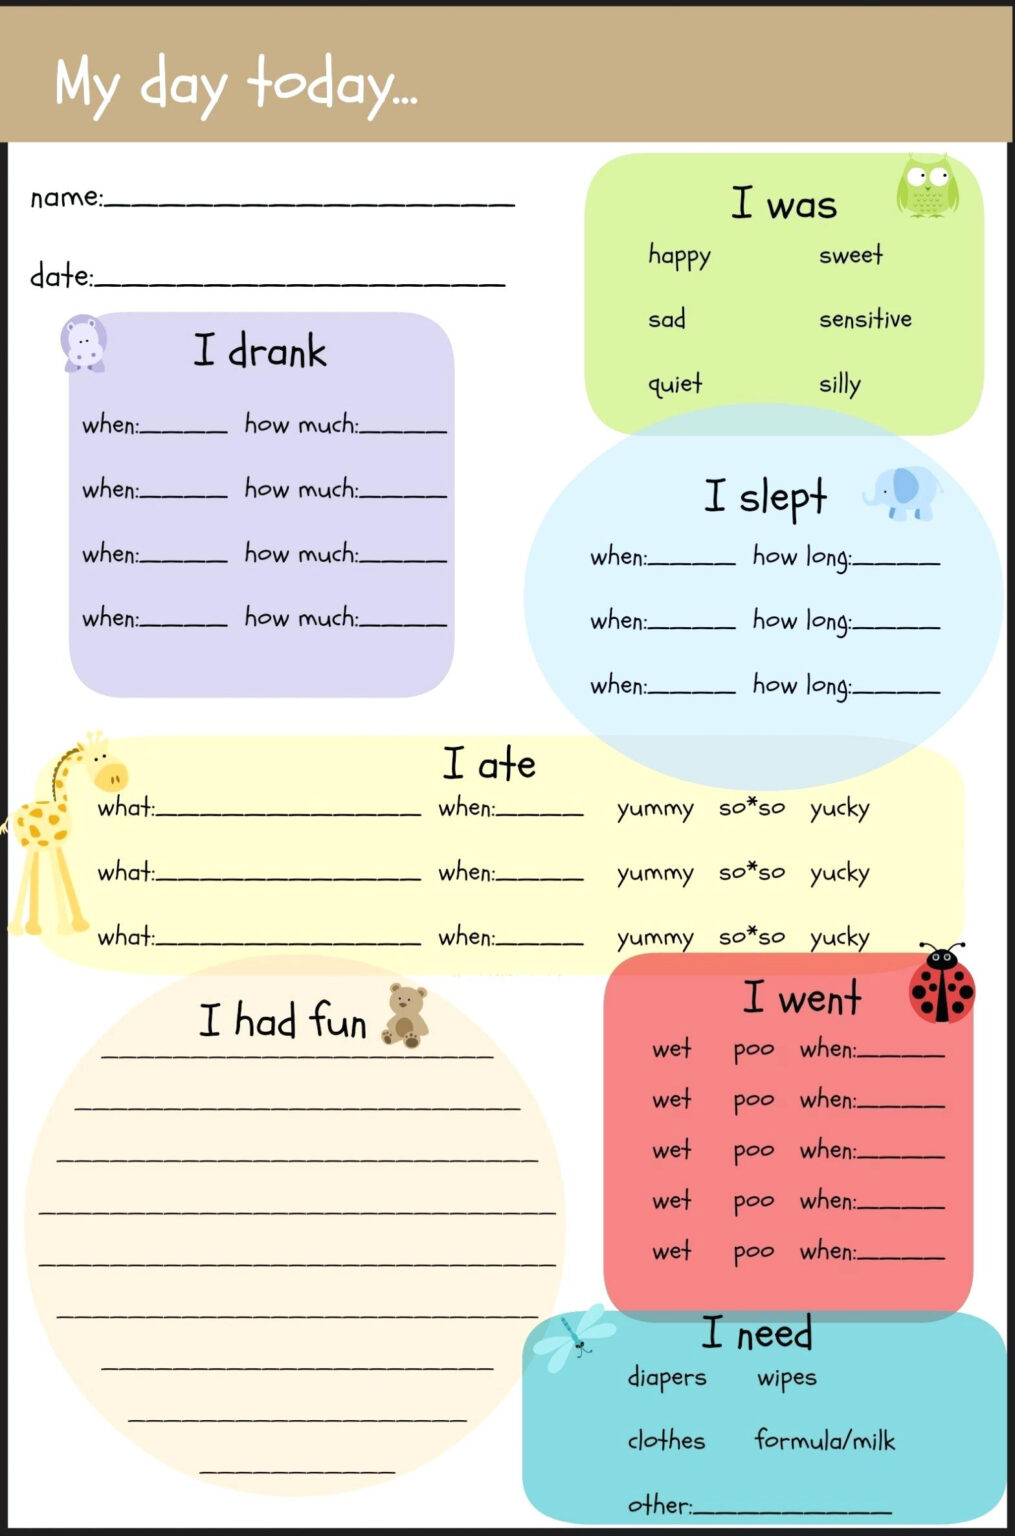 Daily Reports For Daycare Printable